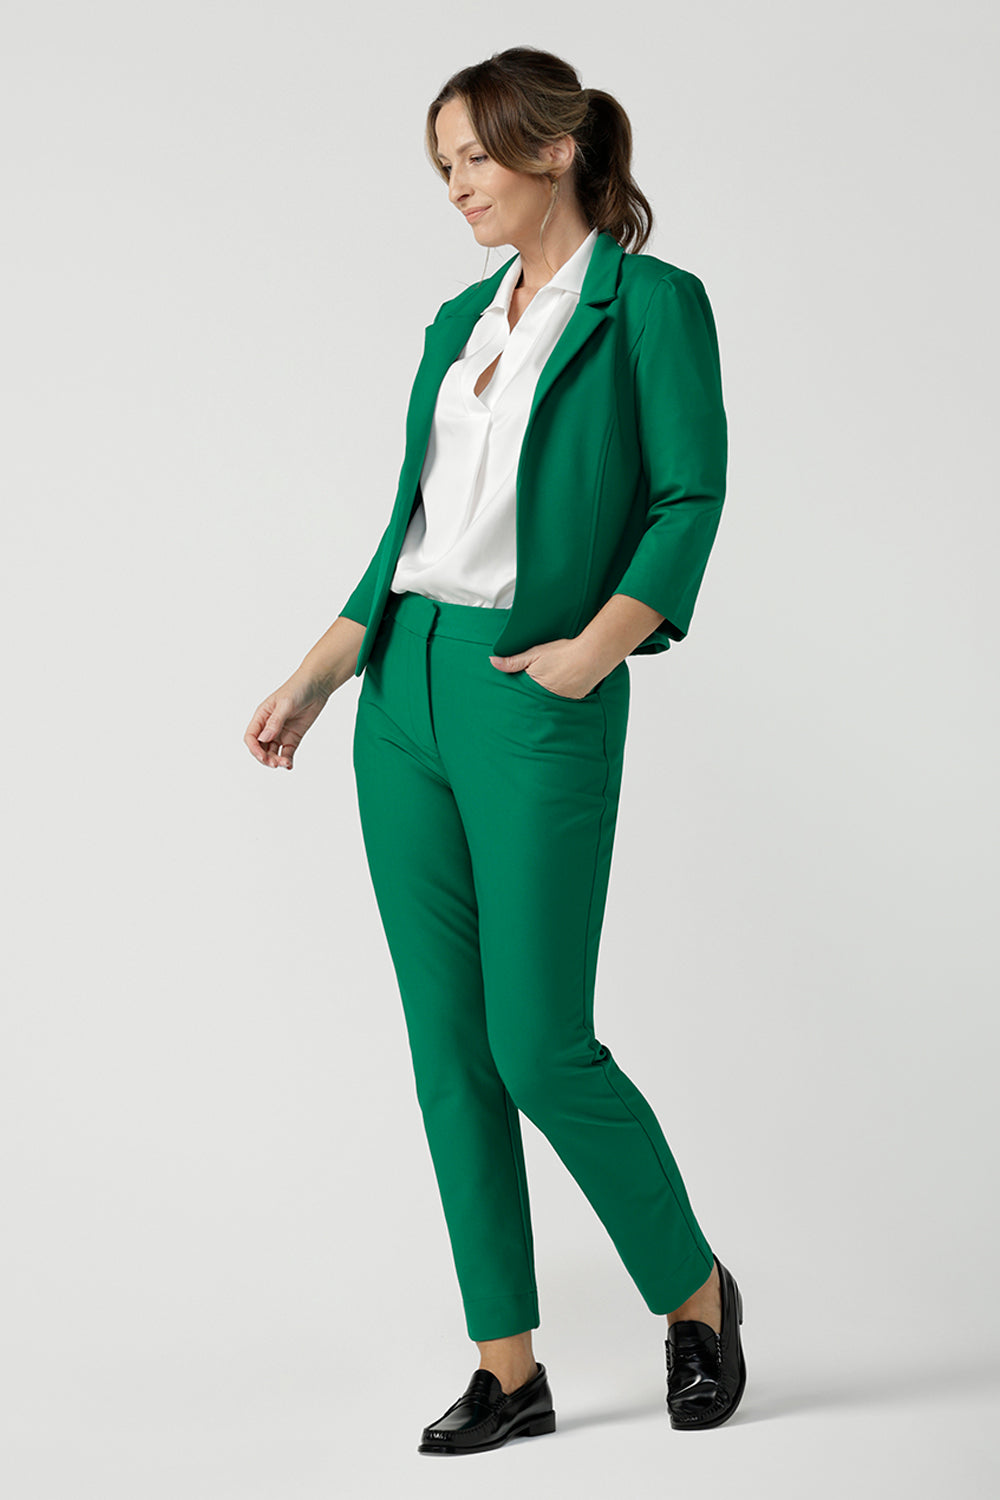 A size 10 woman wears a tailored jacket with open front and collar and notch lapels is made in Emerald green ponte fabric. Styled with Emerald green tailored pants, and a white collared shirt for a fresh workwear look. Shop exclusive luxury, this work jacket is available at Australian and New Zealand women's clothing label, L&F.